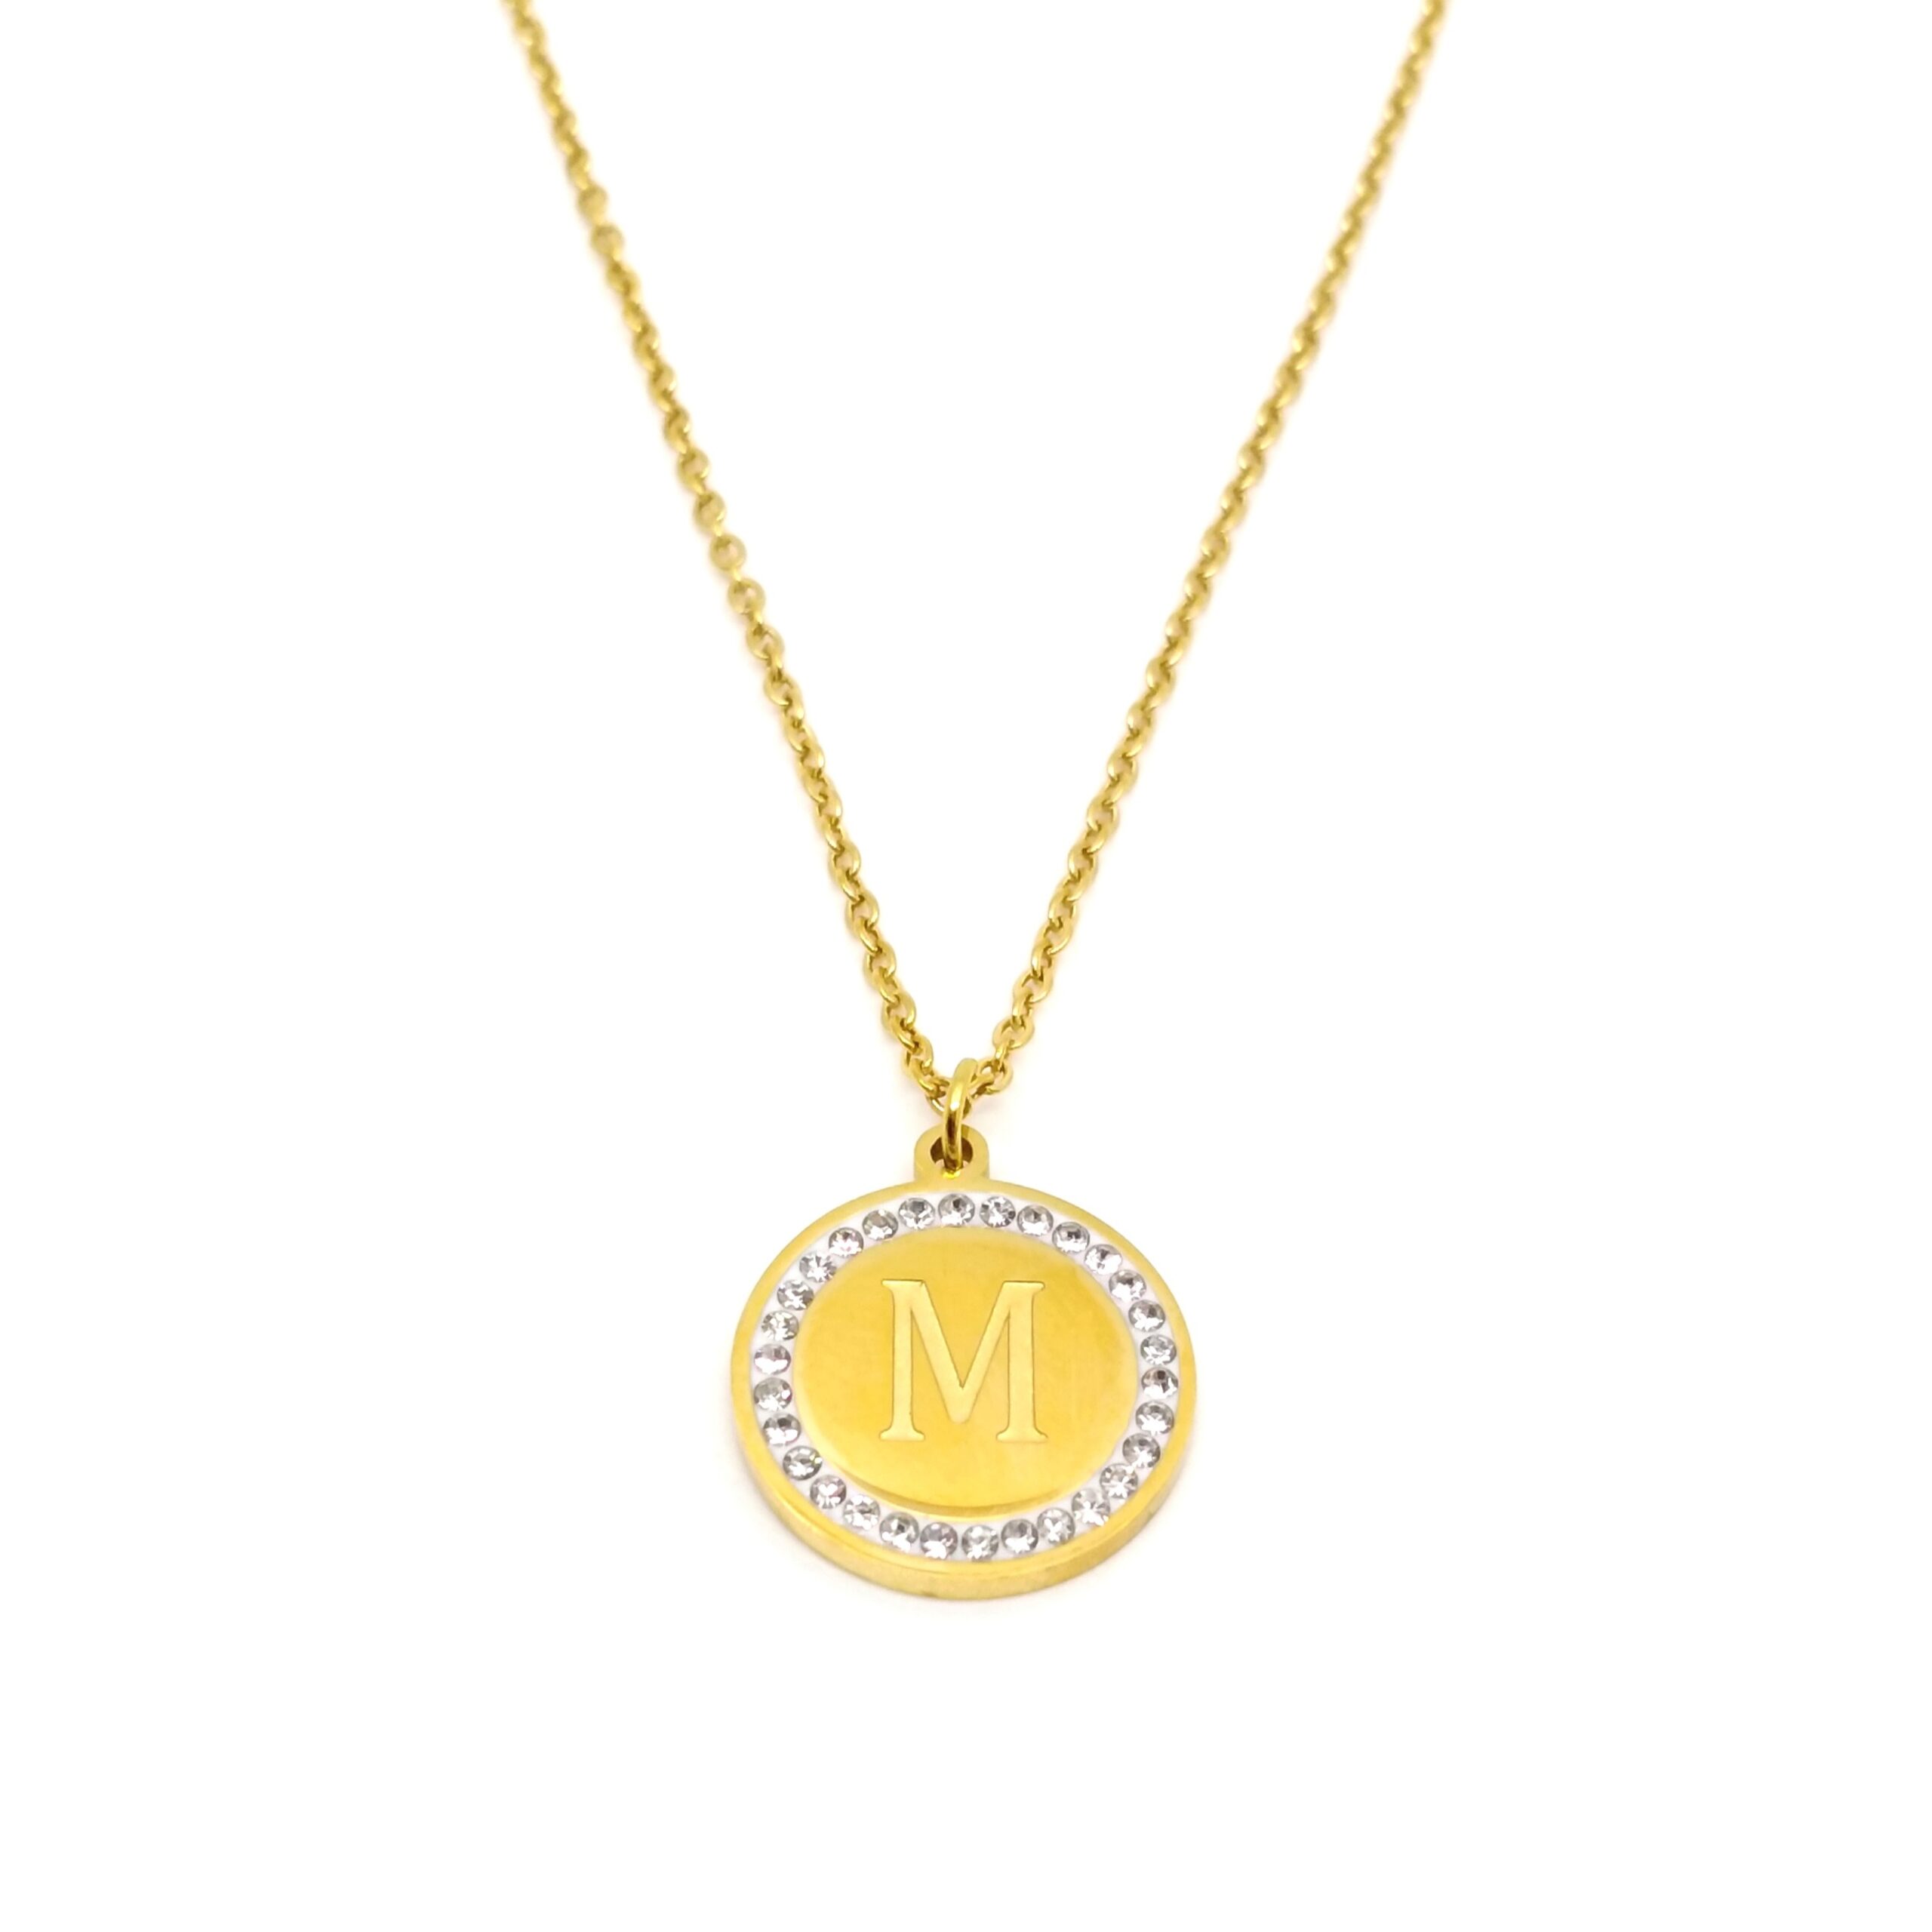 Gold Plated round necklace with the symbel "M" in it